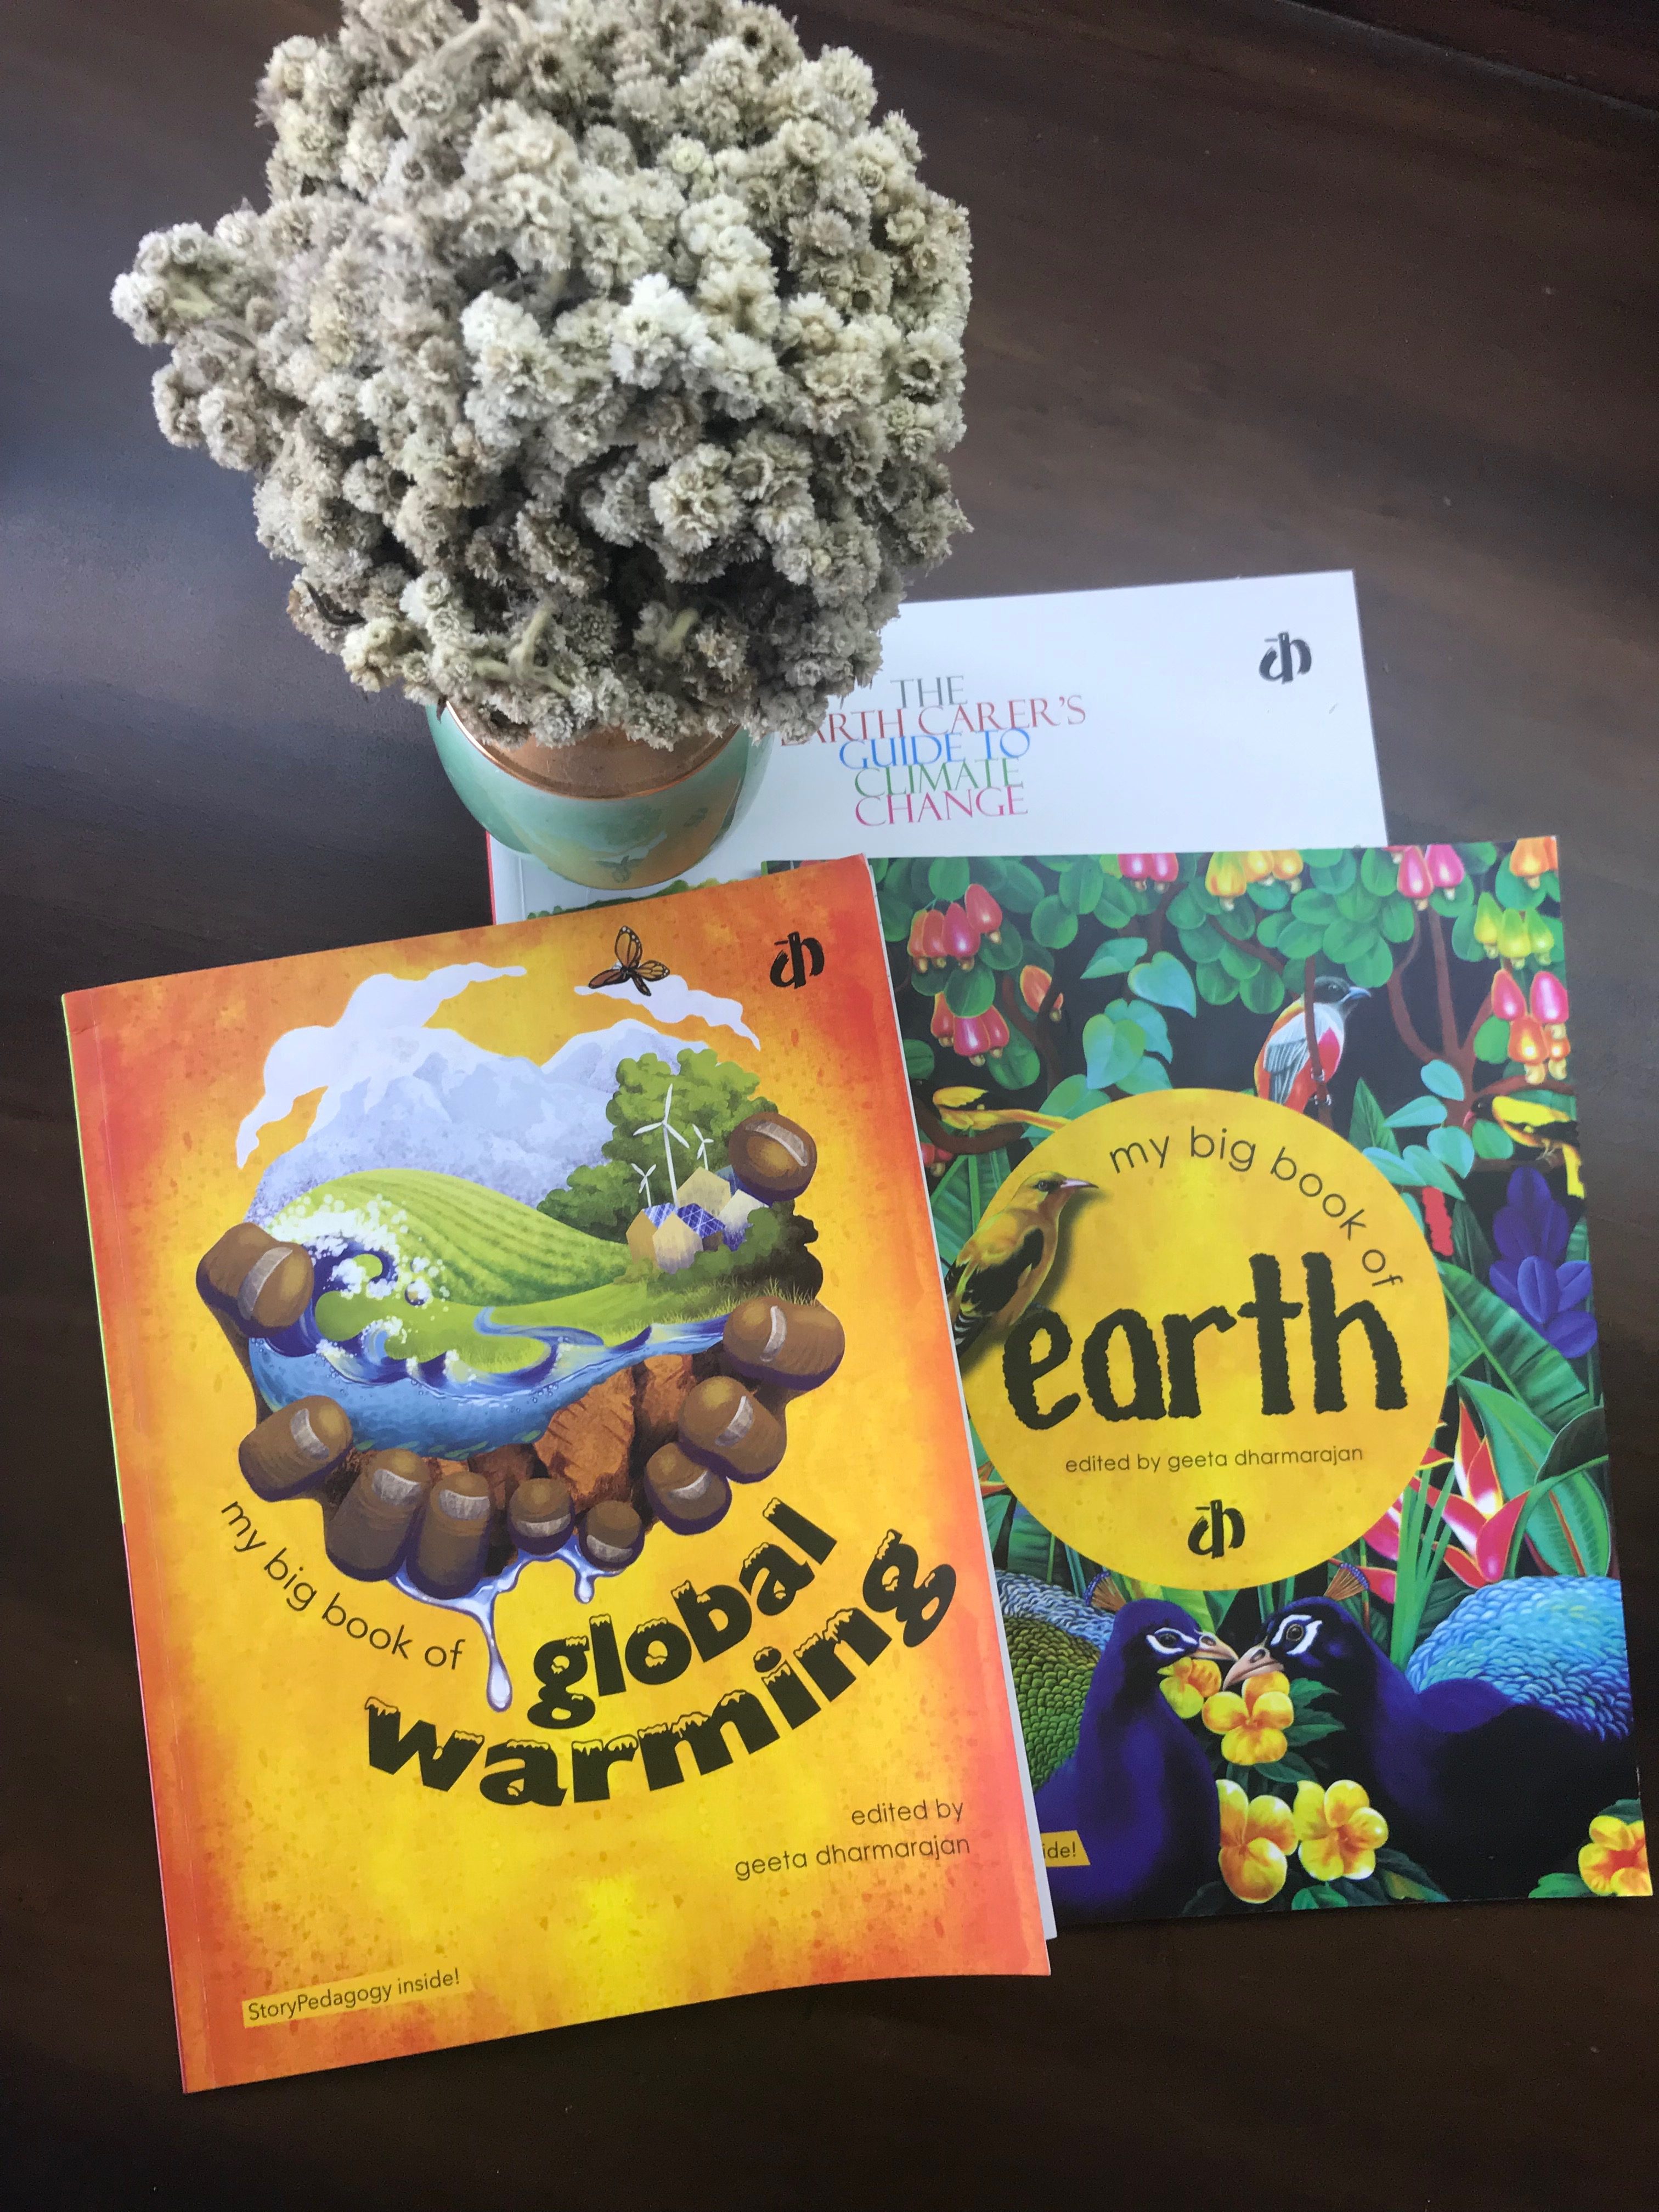 You are currently viewing These books from the Earth Carer series by Katha Publishers venture into teaching children to care about the earth, and how our actions impact it.